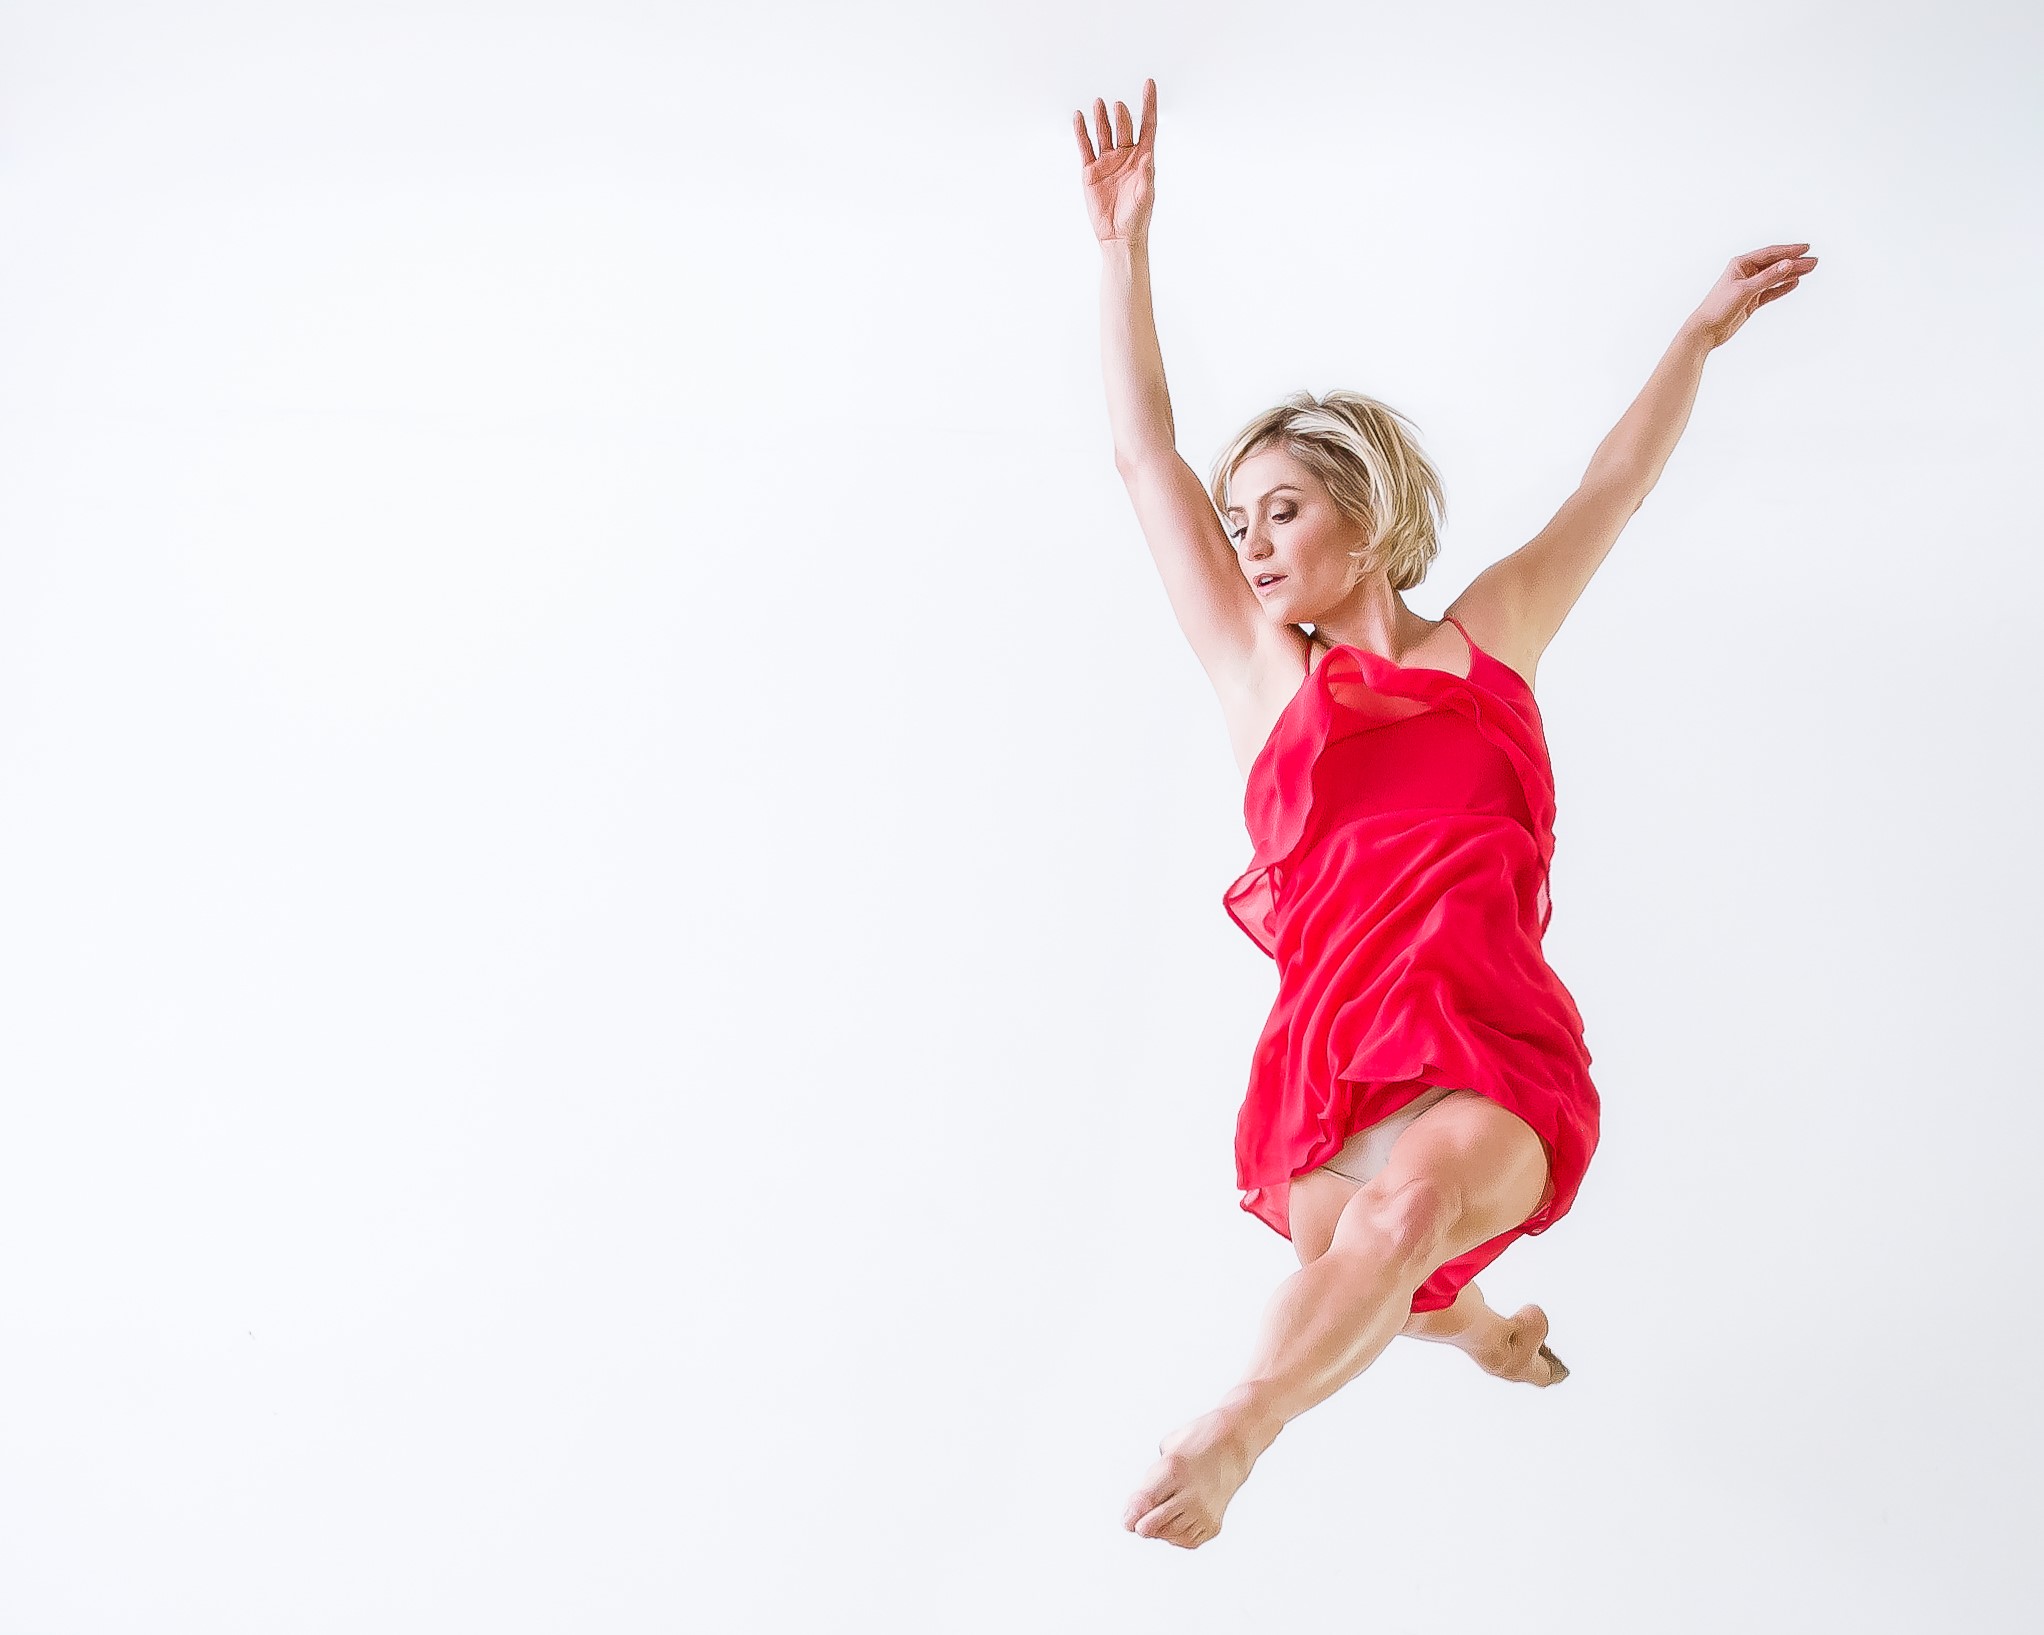 a female dancer wearing a red dress jumping in the air